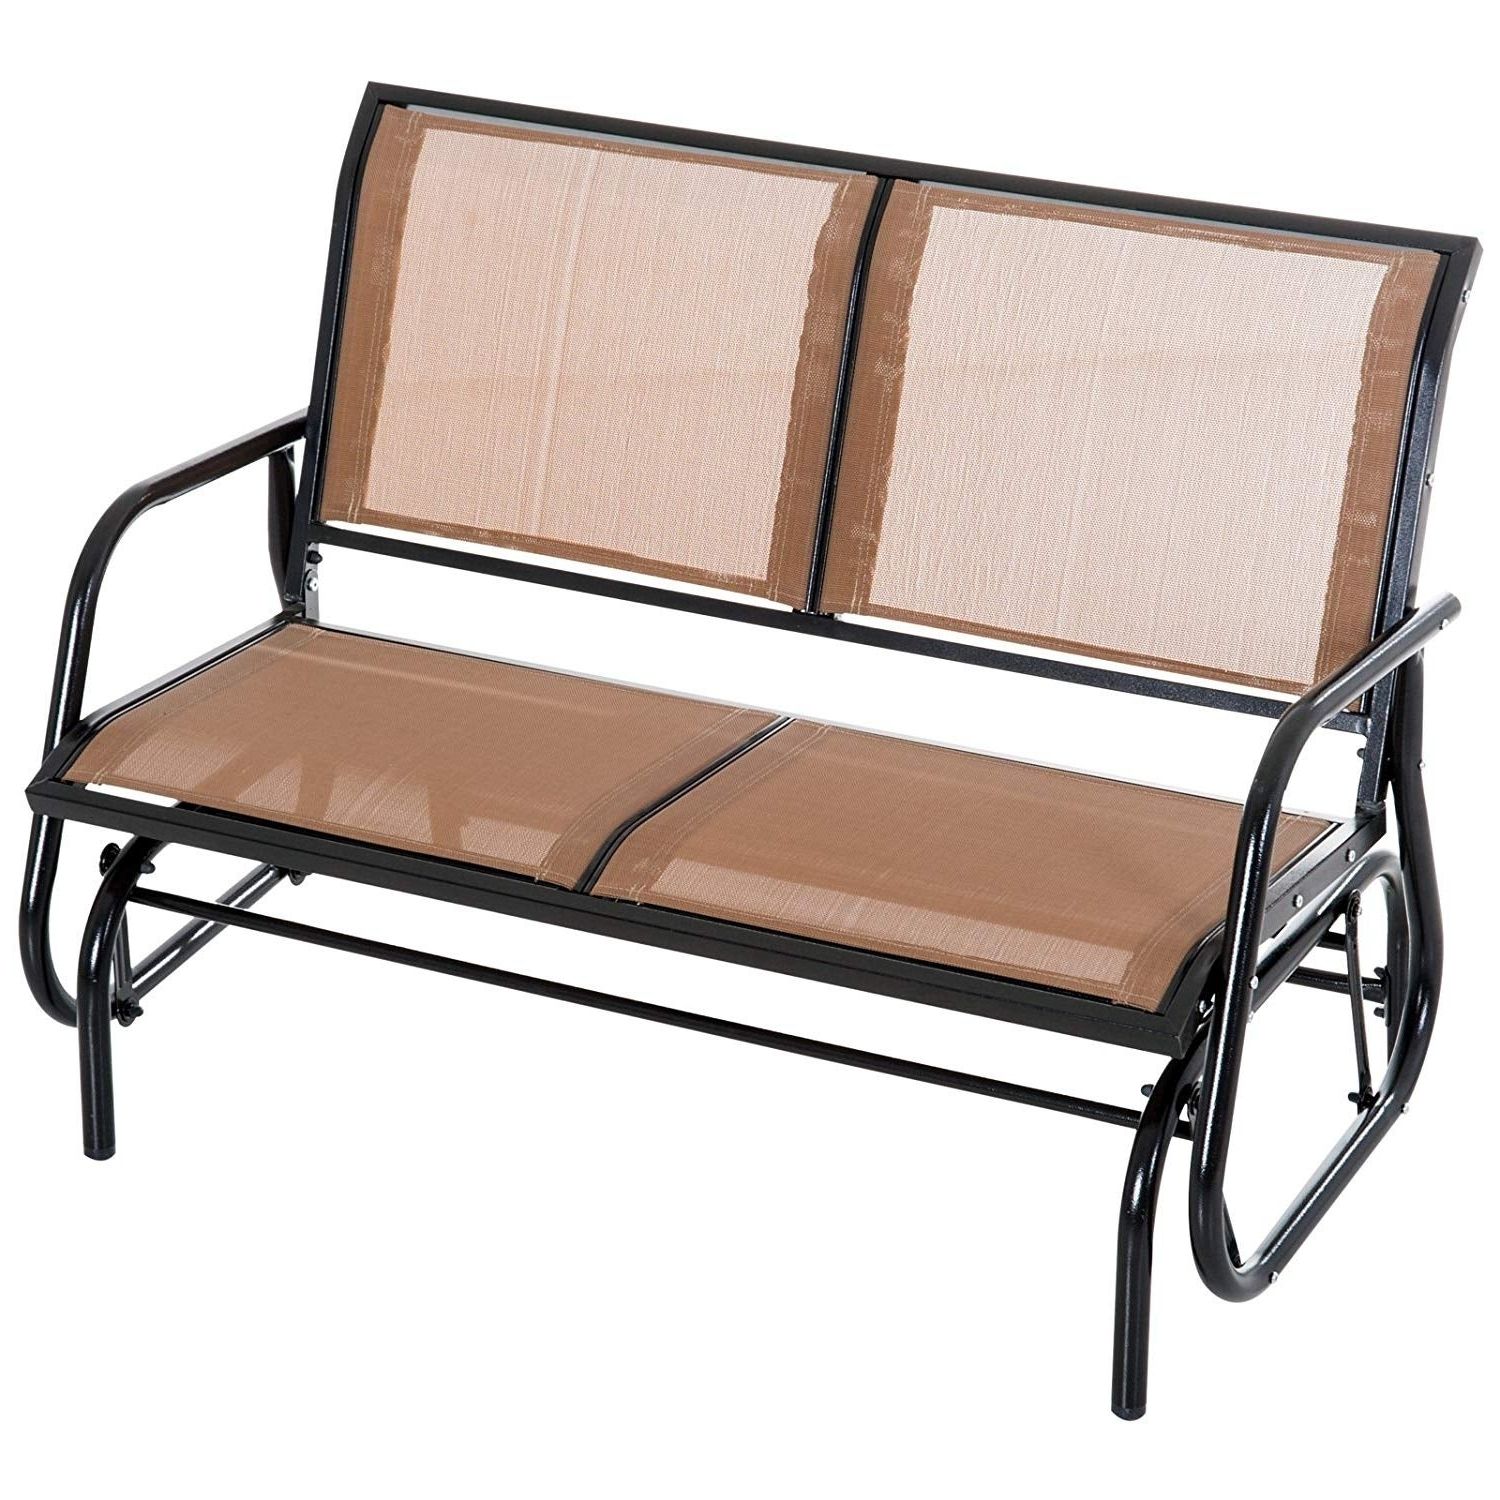 2019 Outsunny 2 Person Steel And Mesh Fabric Sling Weather Resistant Outdoor  Patio Glider Double Swing Chair – Brown Throughout Sling Double Glider Benches (View 24 of 30)